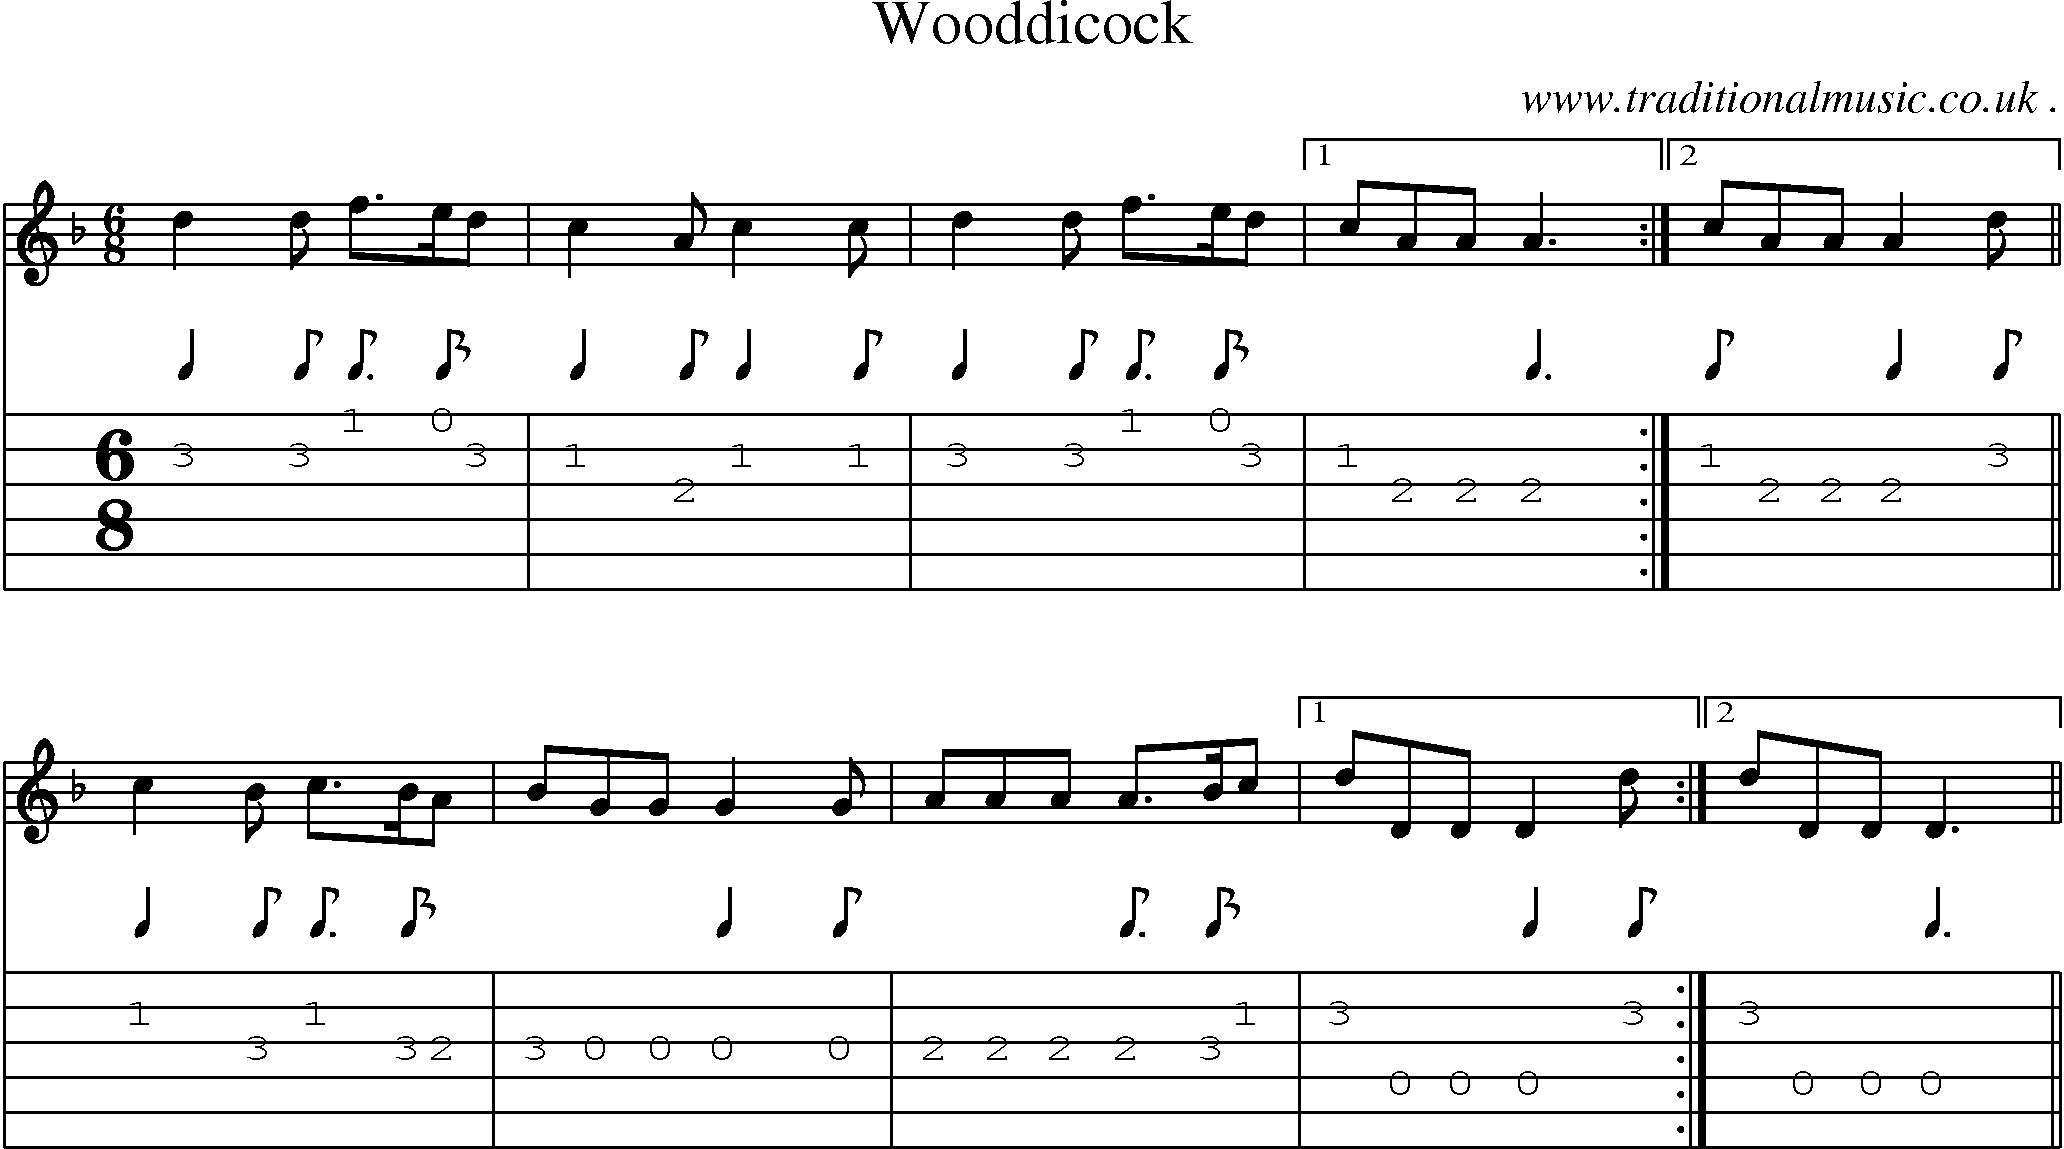 Sheet-music  score, Chords and Guitar Tabs for Wooddicock